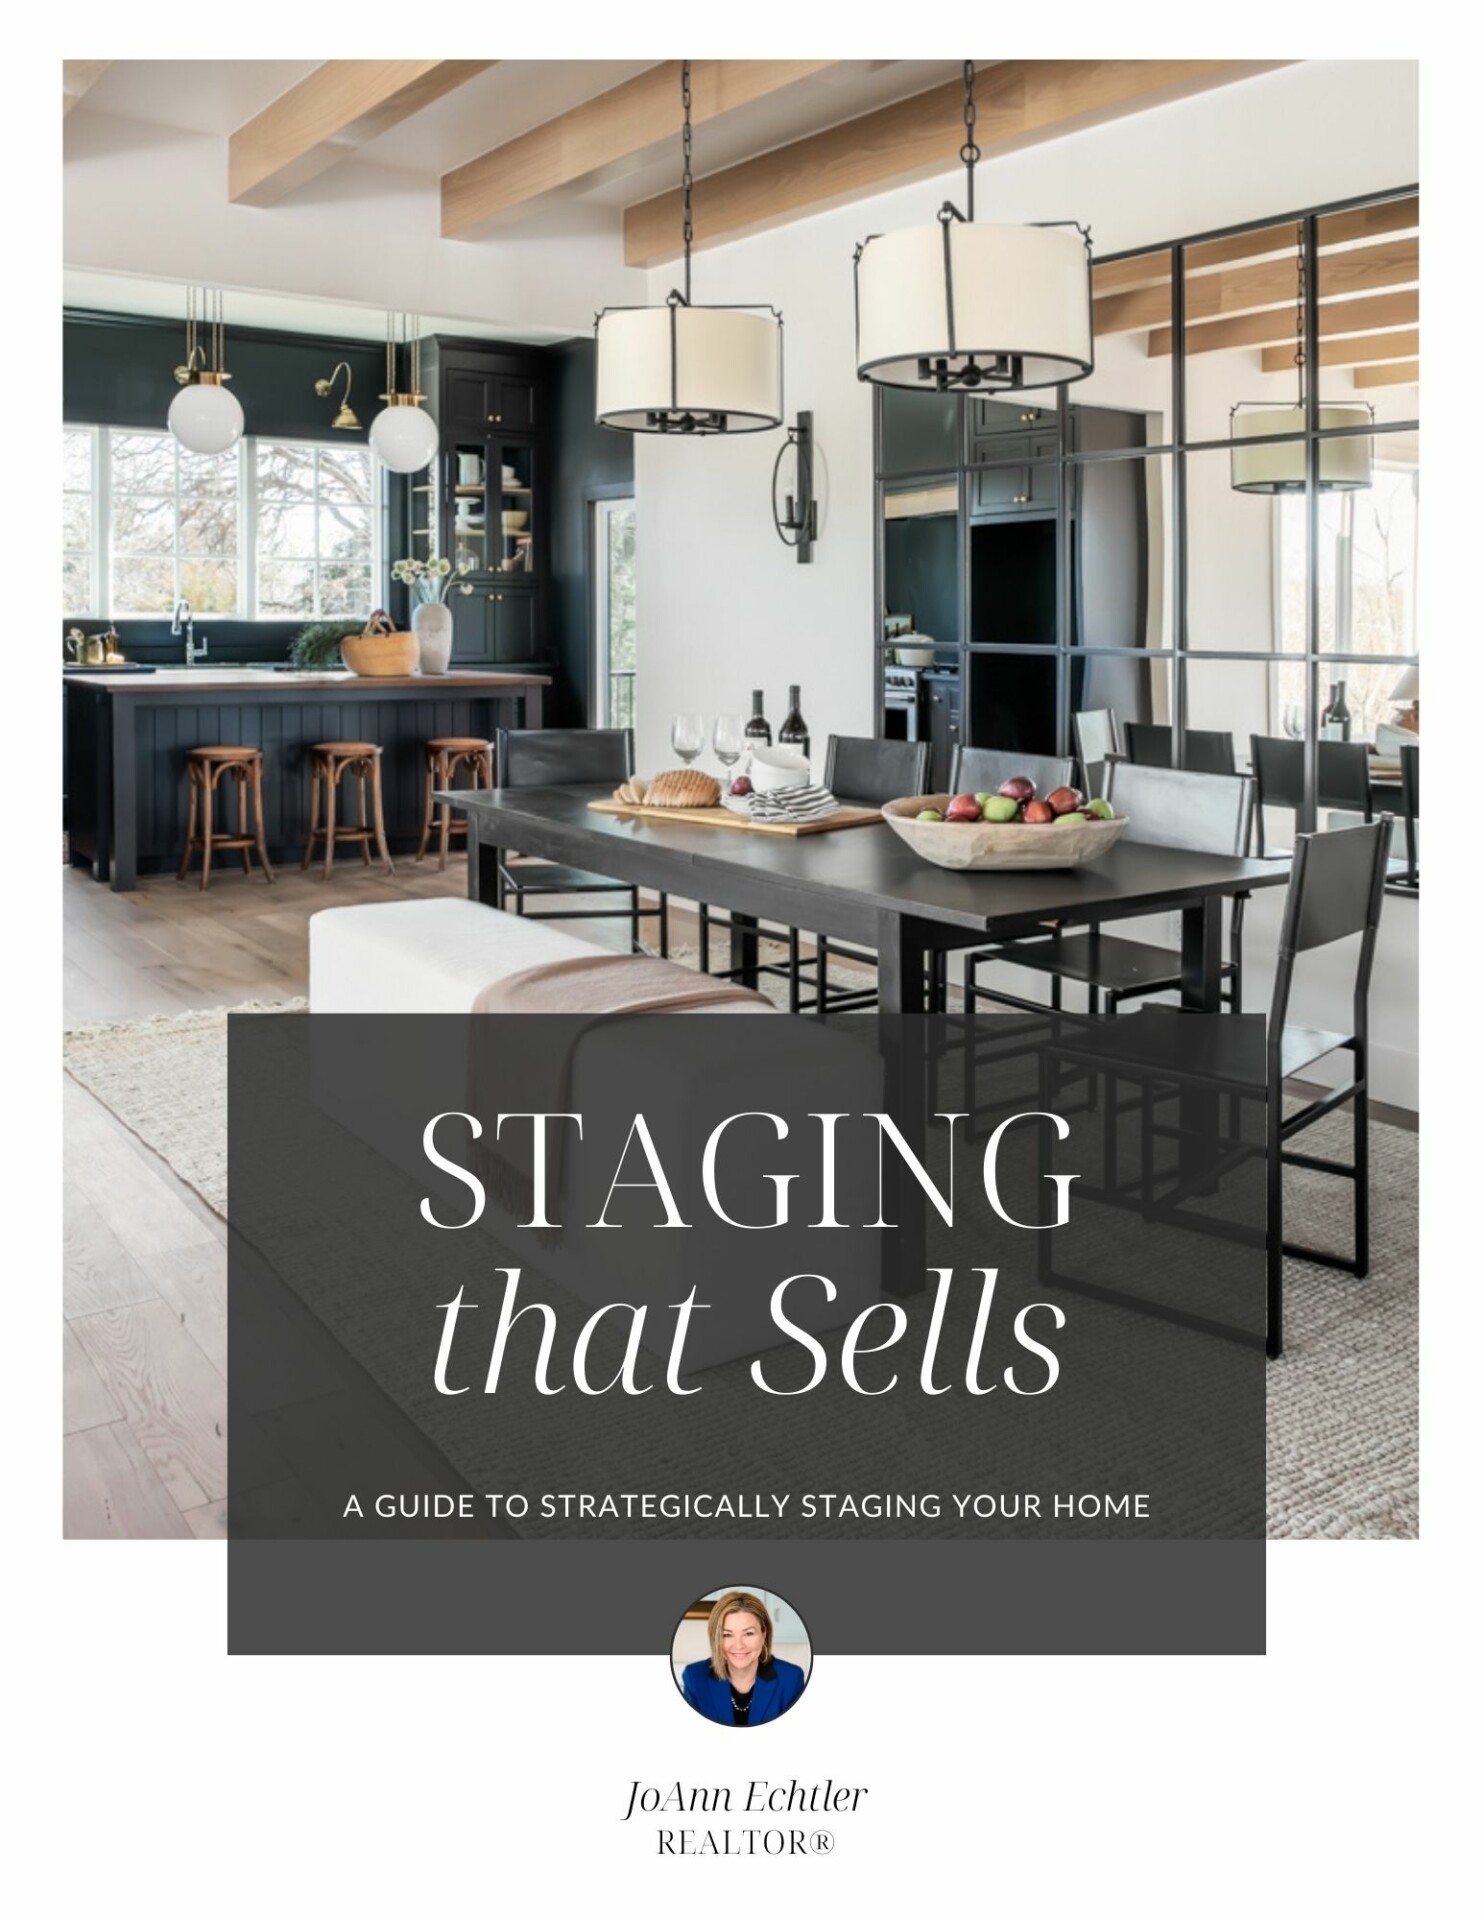 Staging that Sells